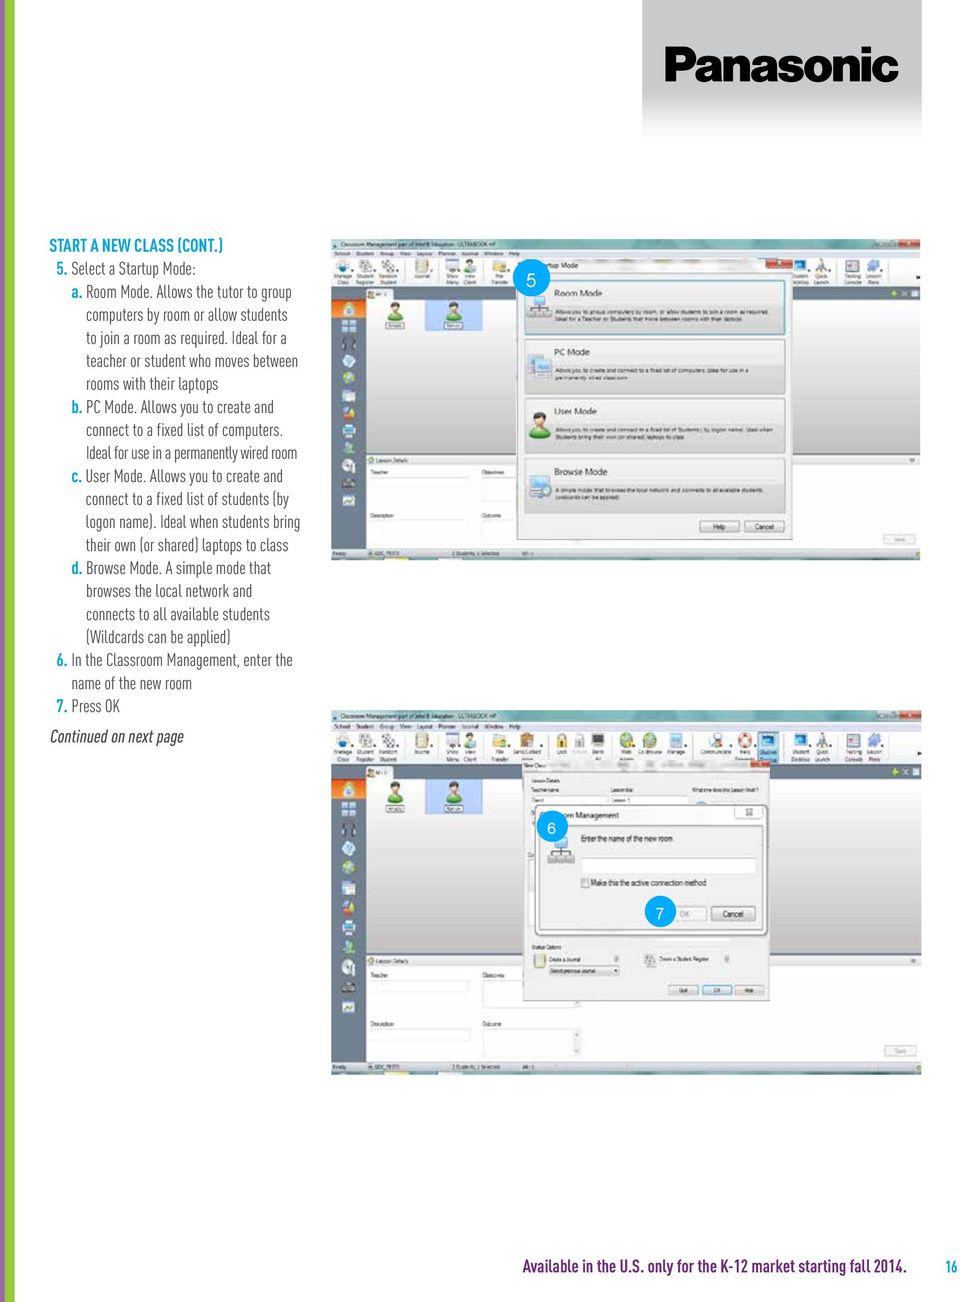 User Mode. Allows you to create and connect to a fixed list of students (by logon name). Ideal when students bring their own (or shared) laptops to class d. Browse Mode.